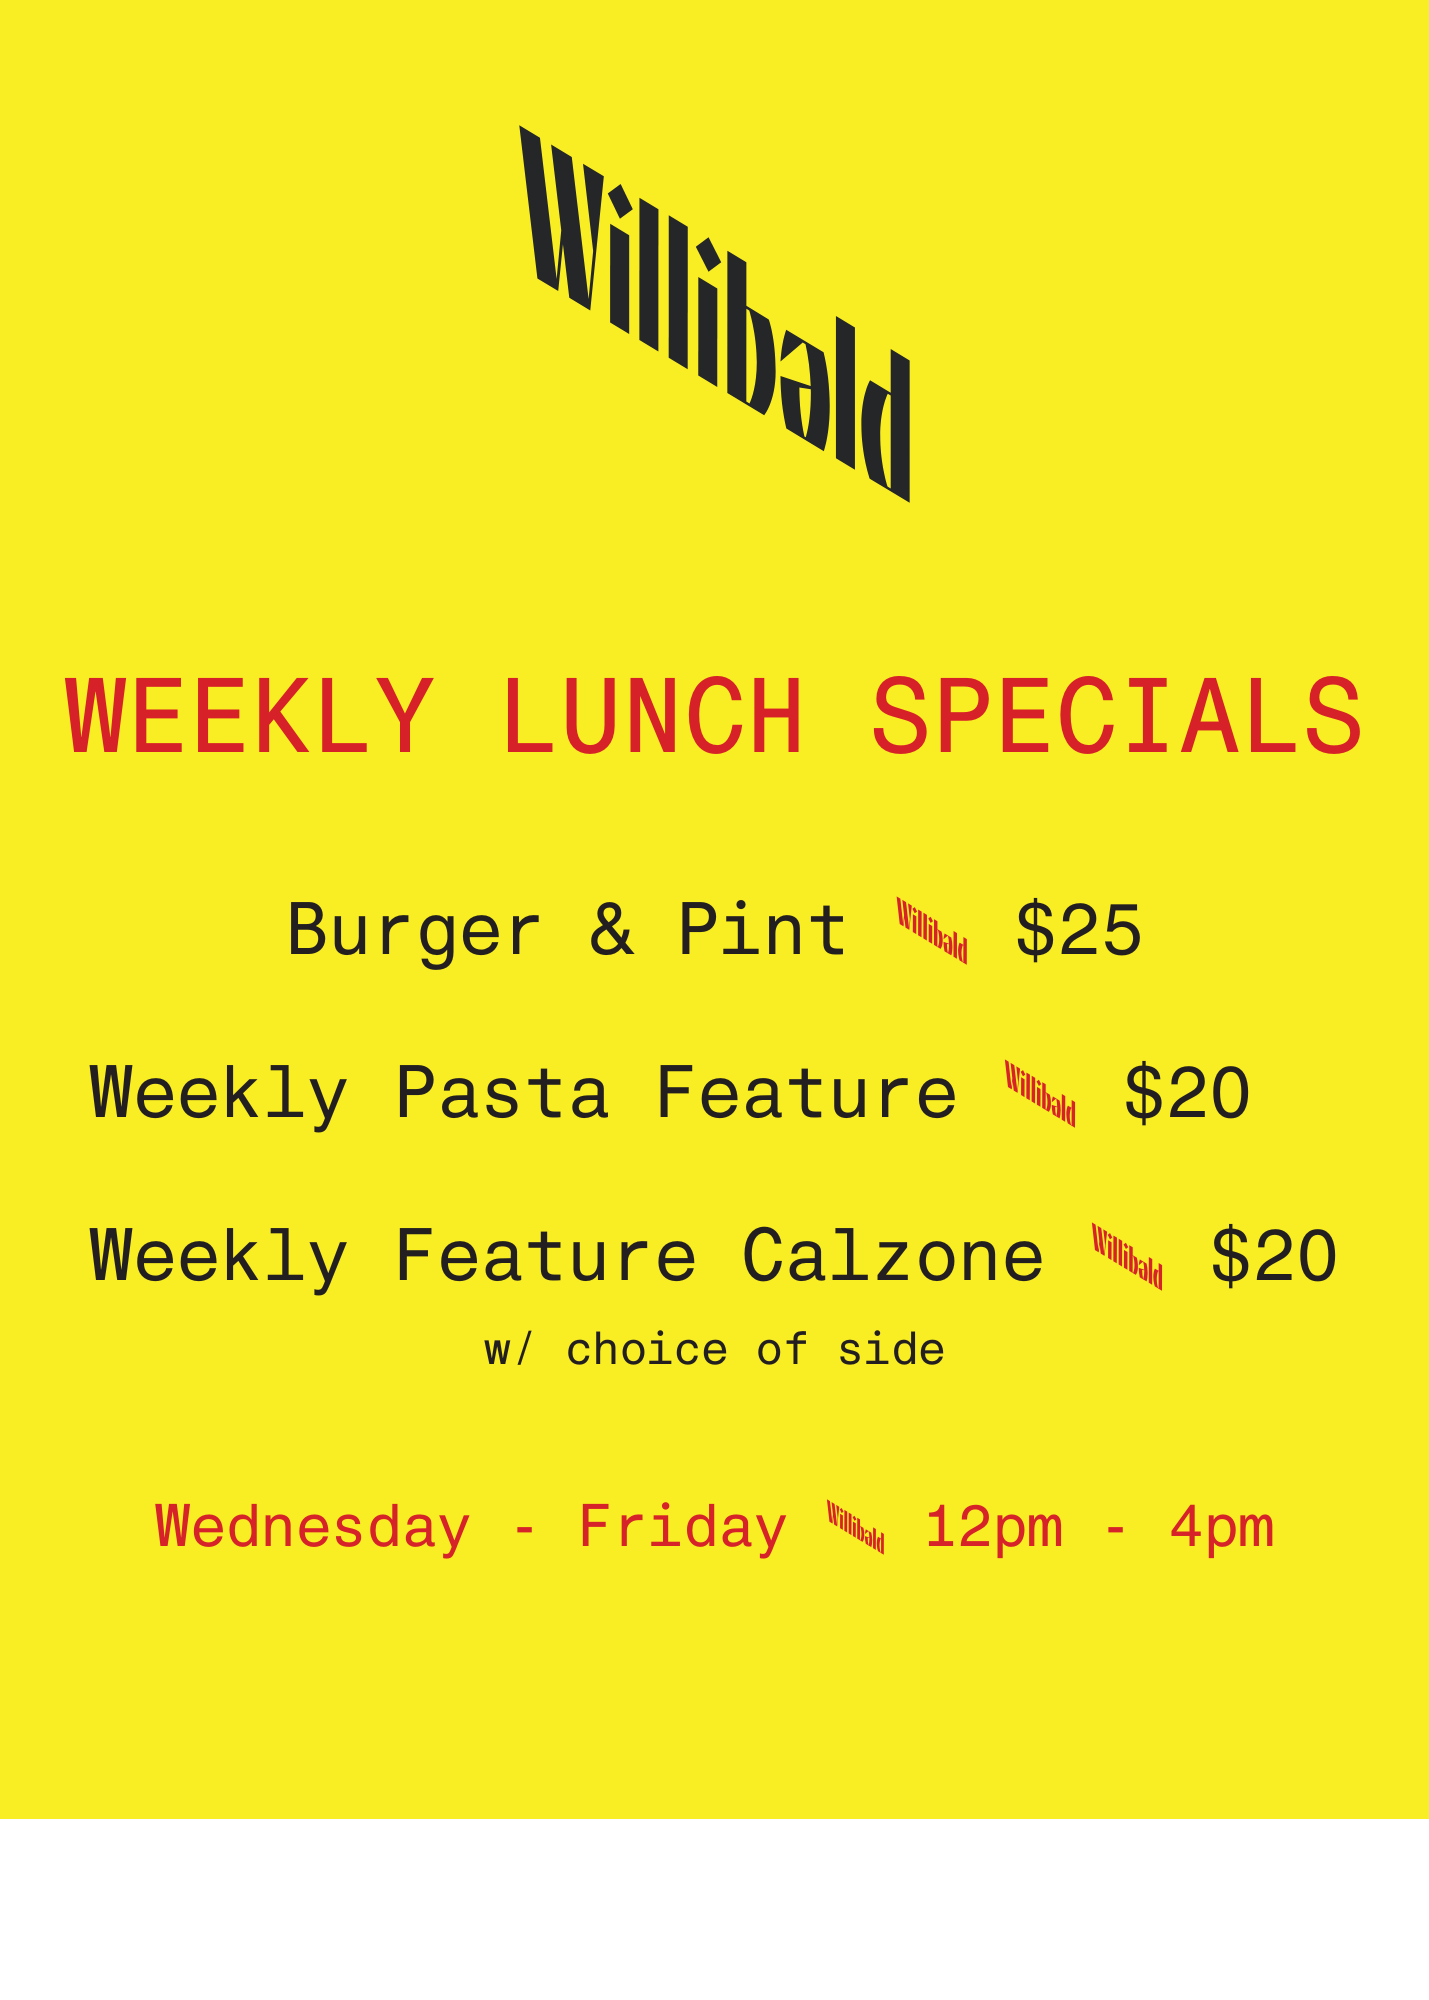 WEEKLY LUNCH SPECIALS